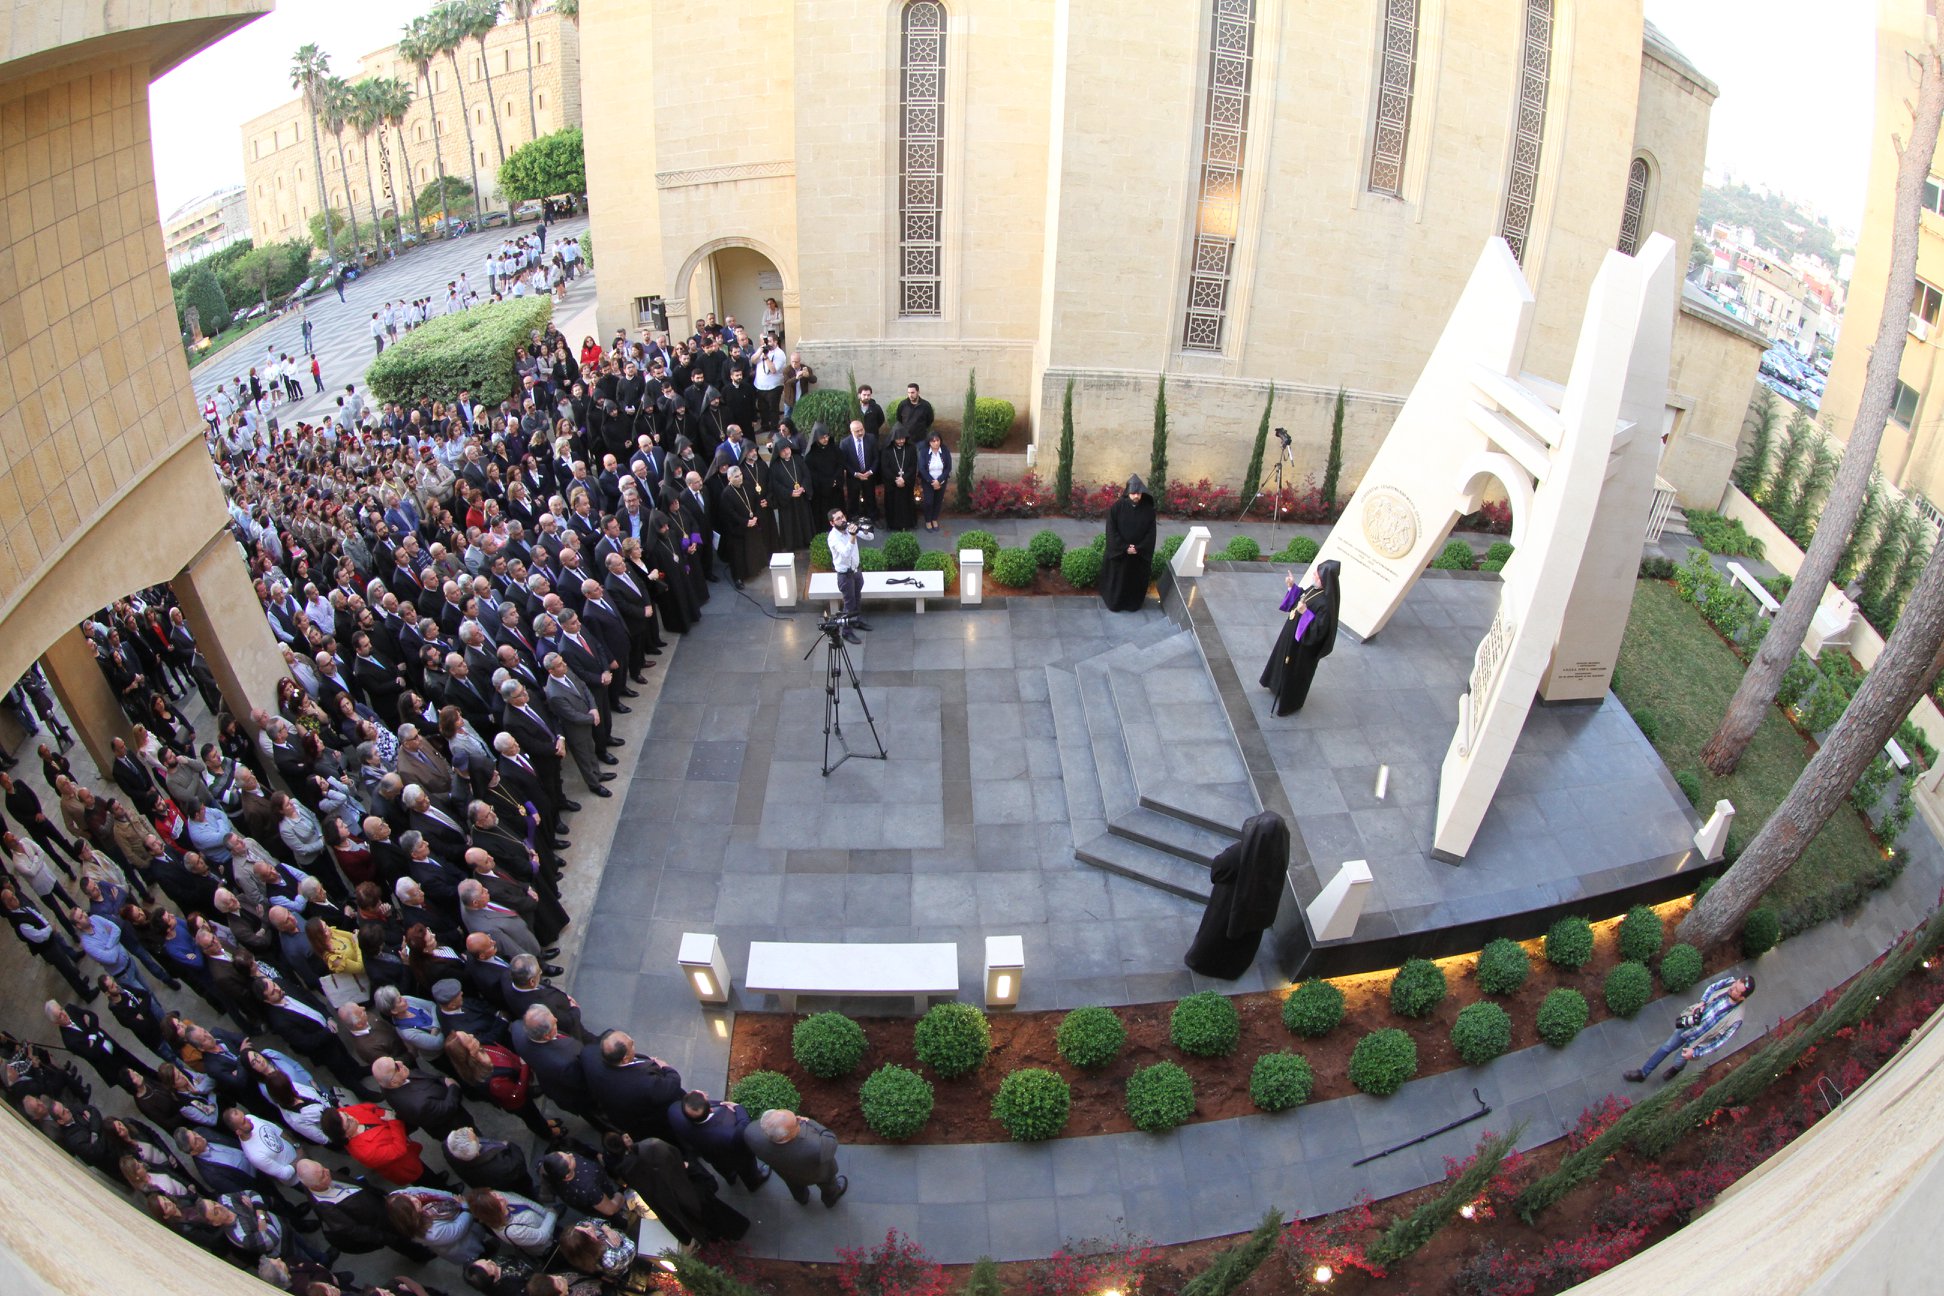 Bako Sahakyan partook in Antelias at a solemn opening ceremony of an Independence Monument